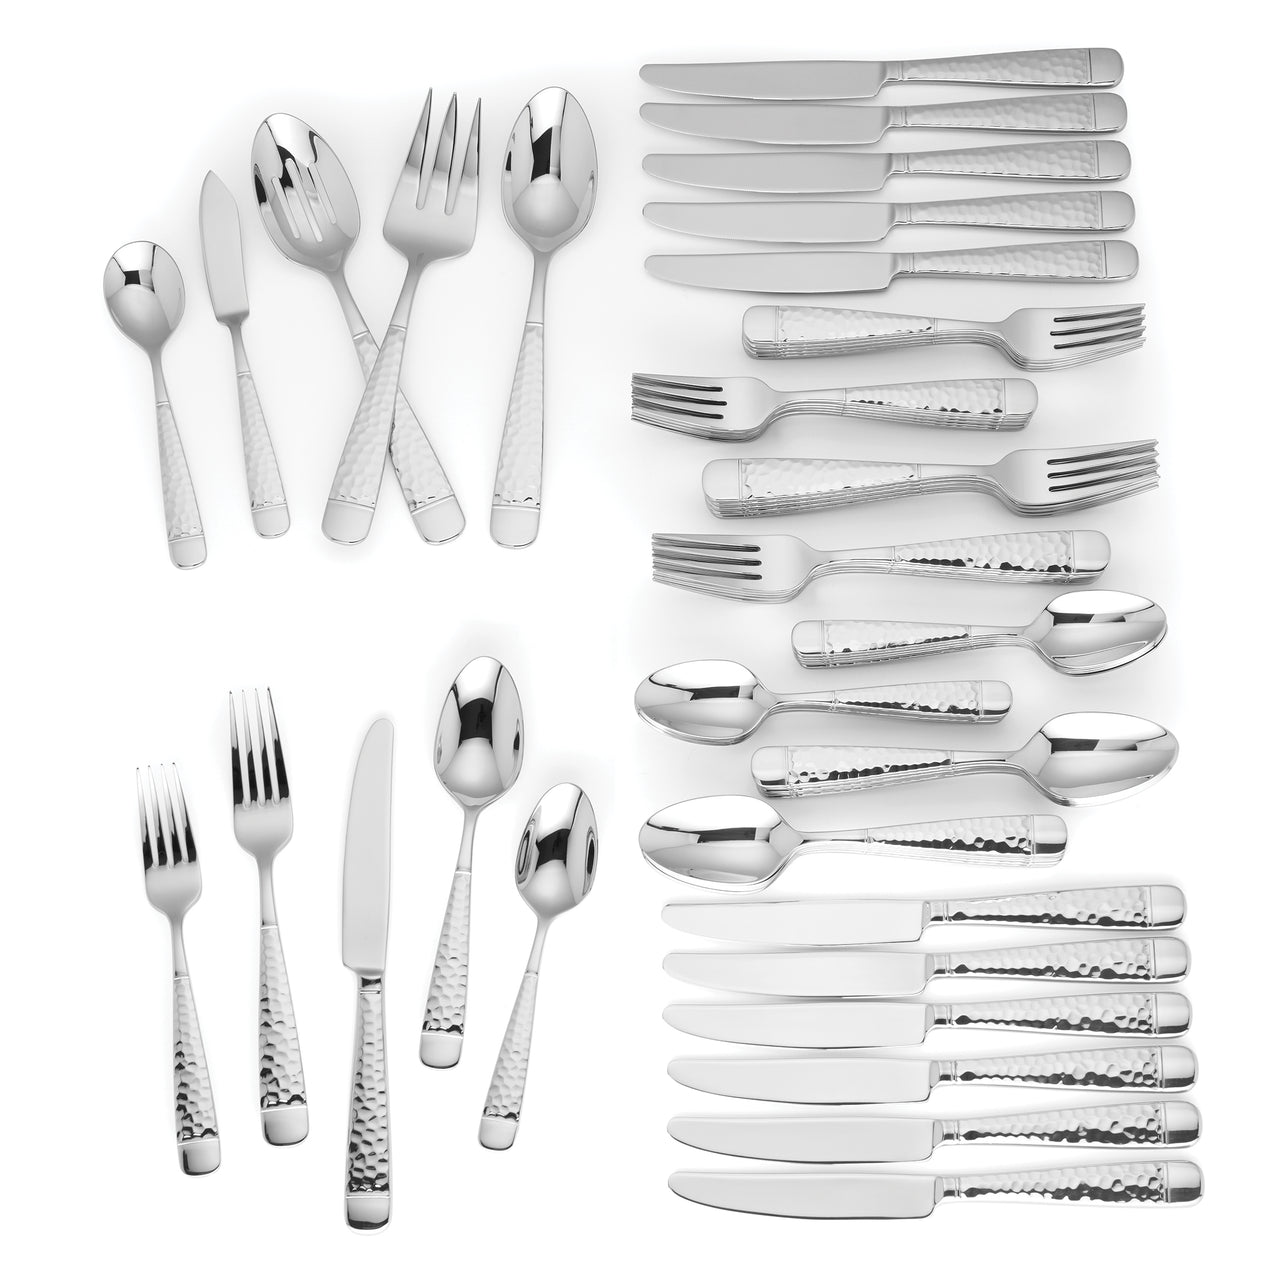 Shop by Category - Pewter and Metal Serveware & Flatware